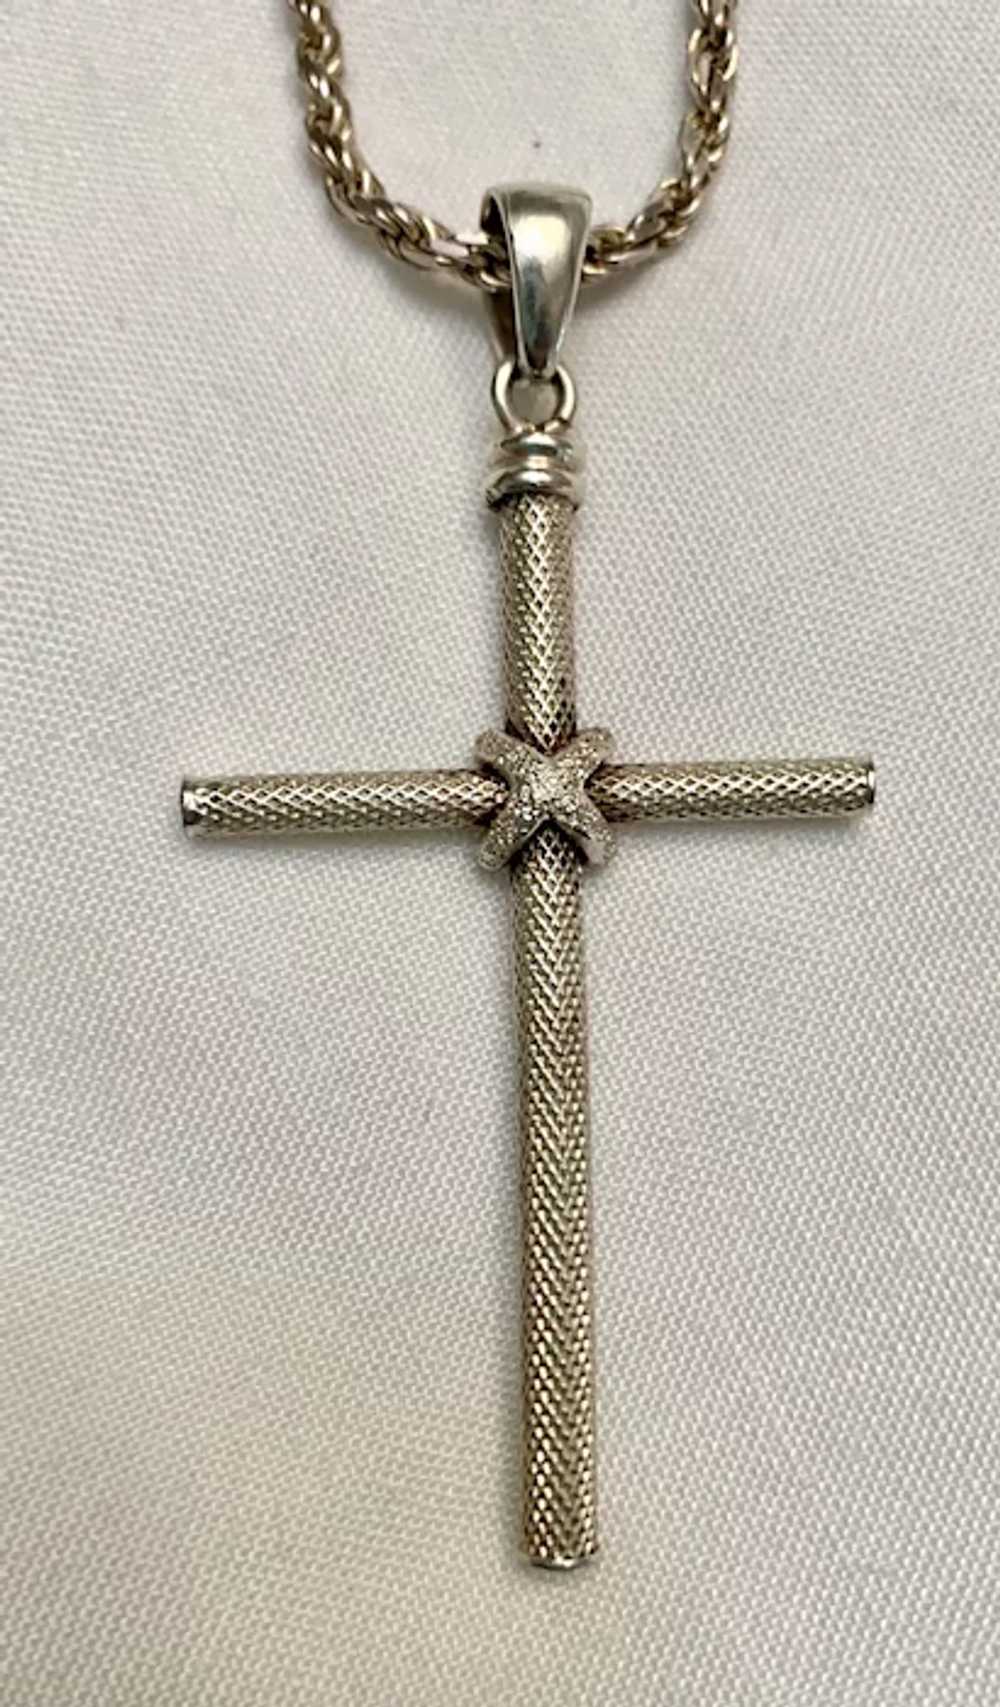 Stunning Sterling Silver Cross with Sterling Chain - image 4